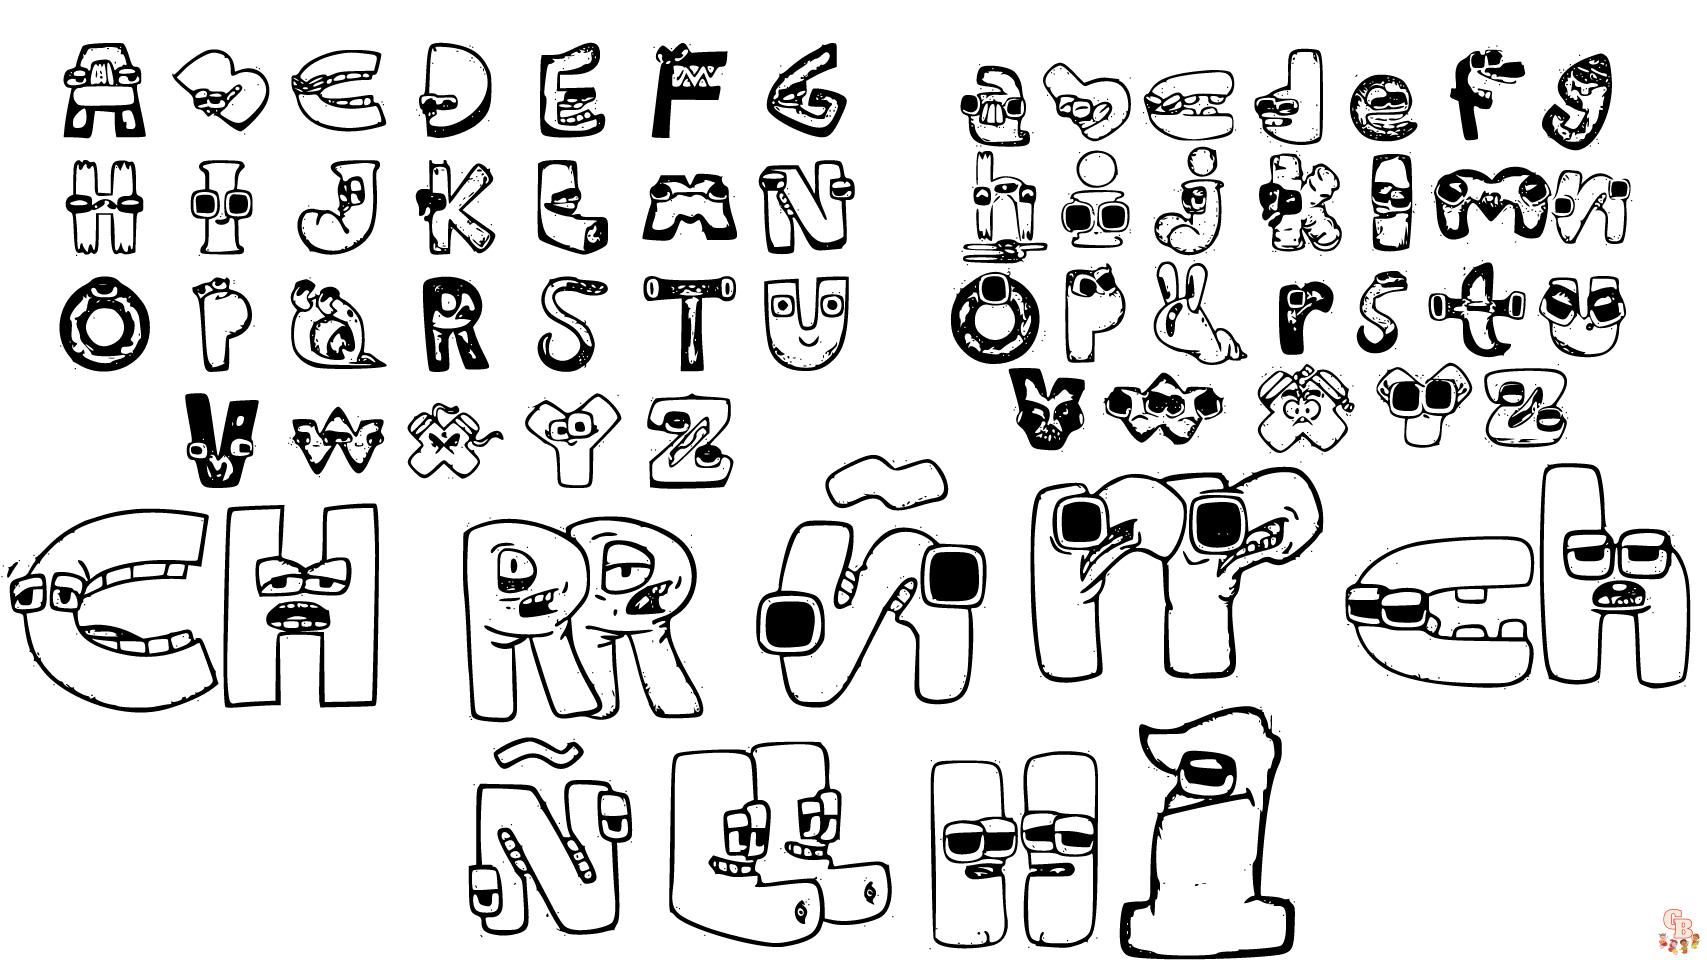 UEFINAL5 Alphabet Lore Coloring Pages for Kida and Students